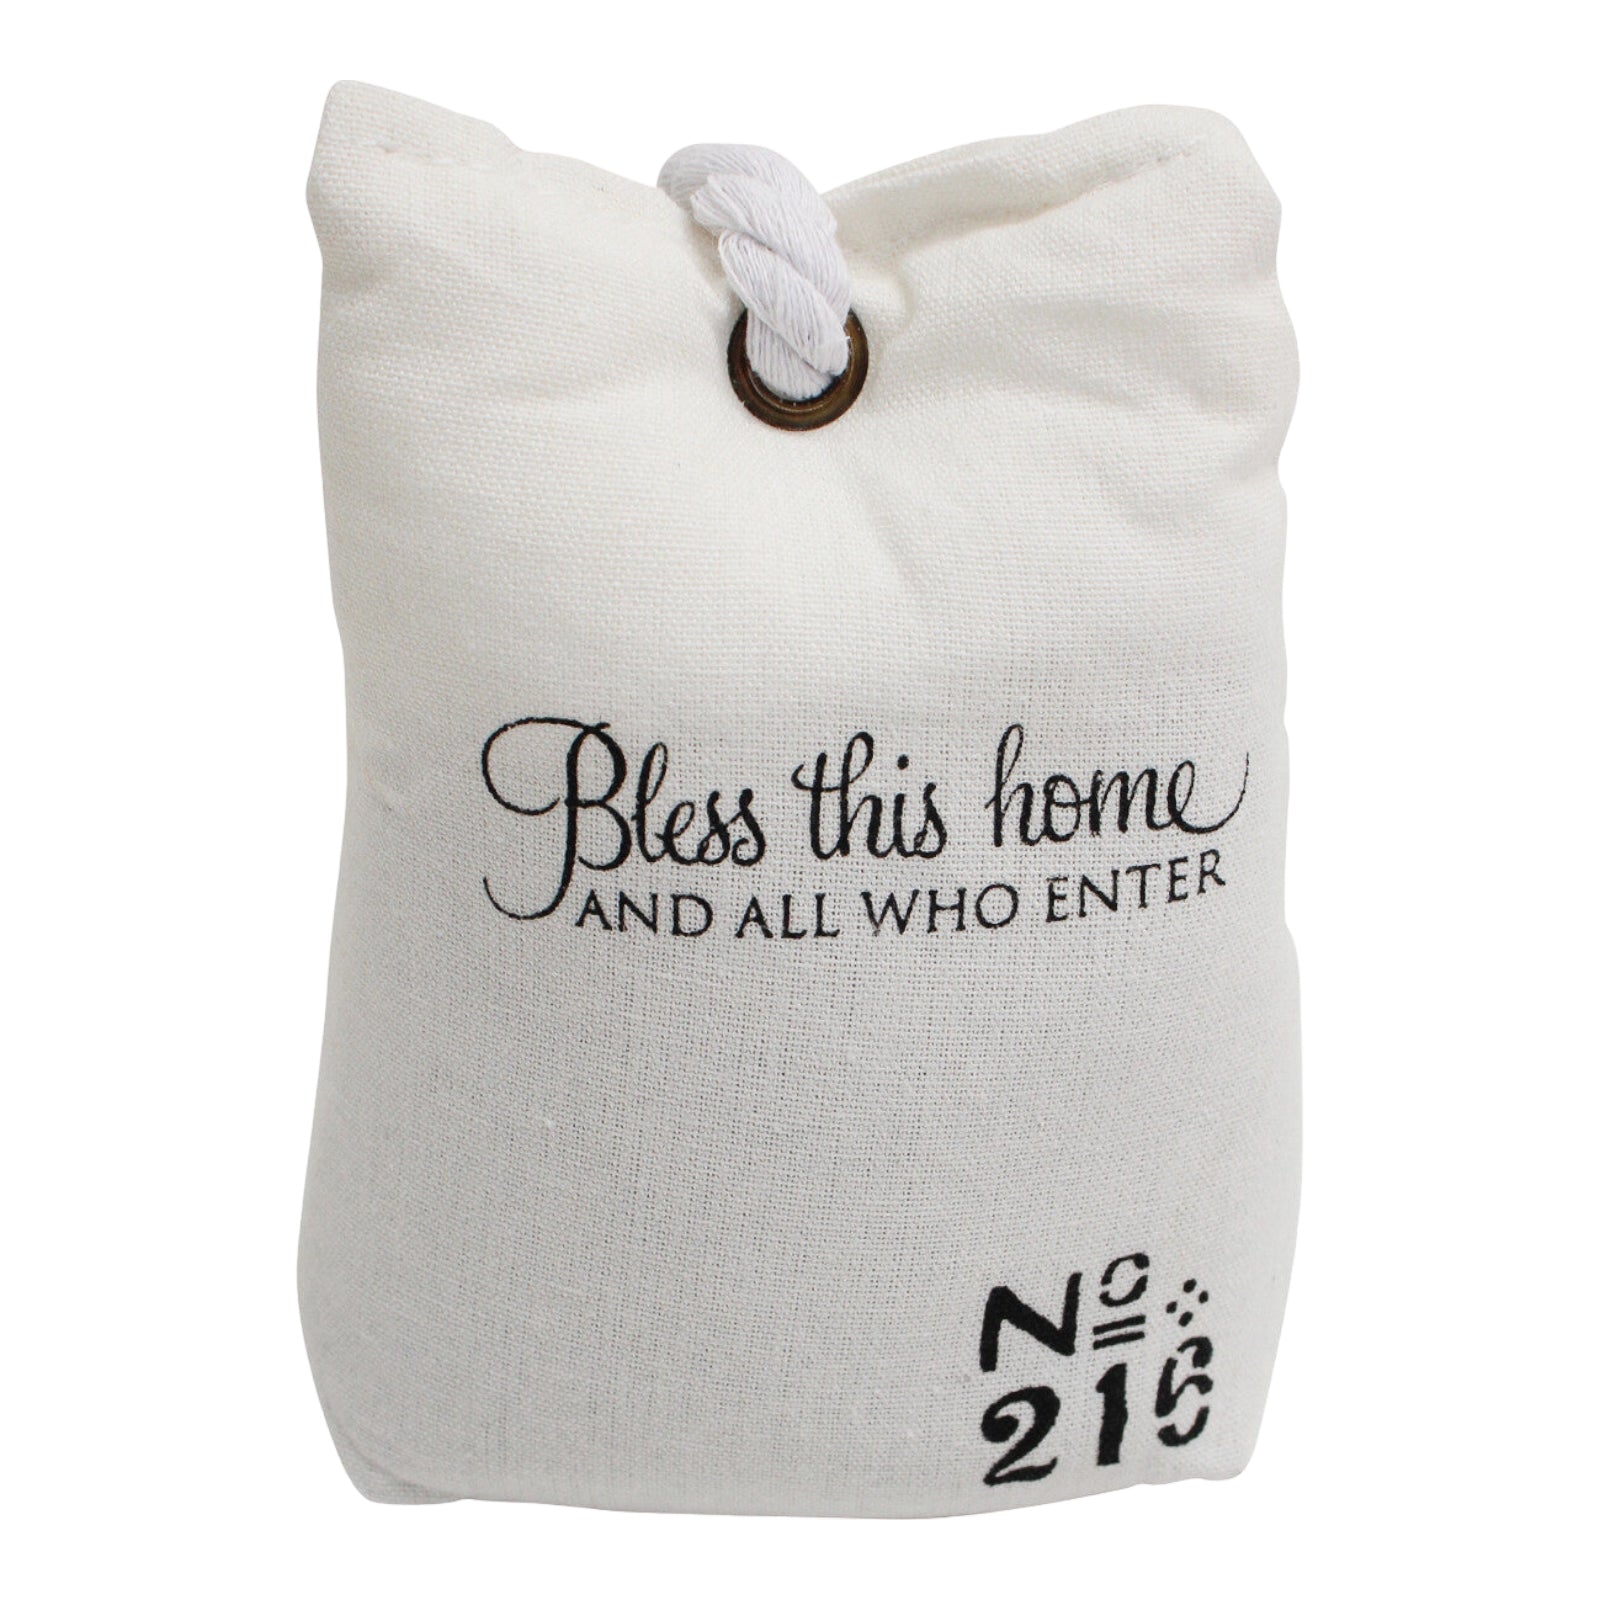 Door Stop Stopper Bless This Home - The Renmy Store Homewares & Gifts 